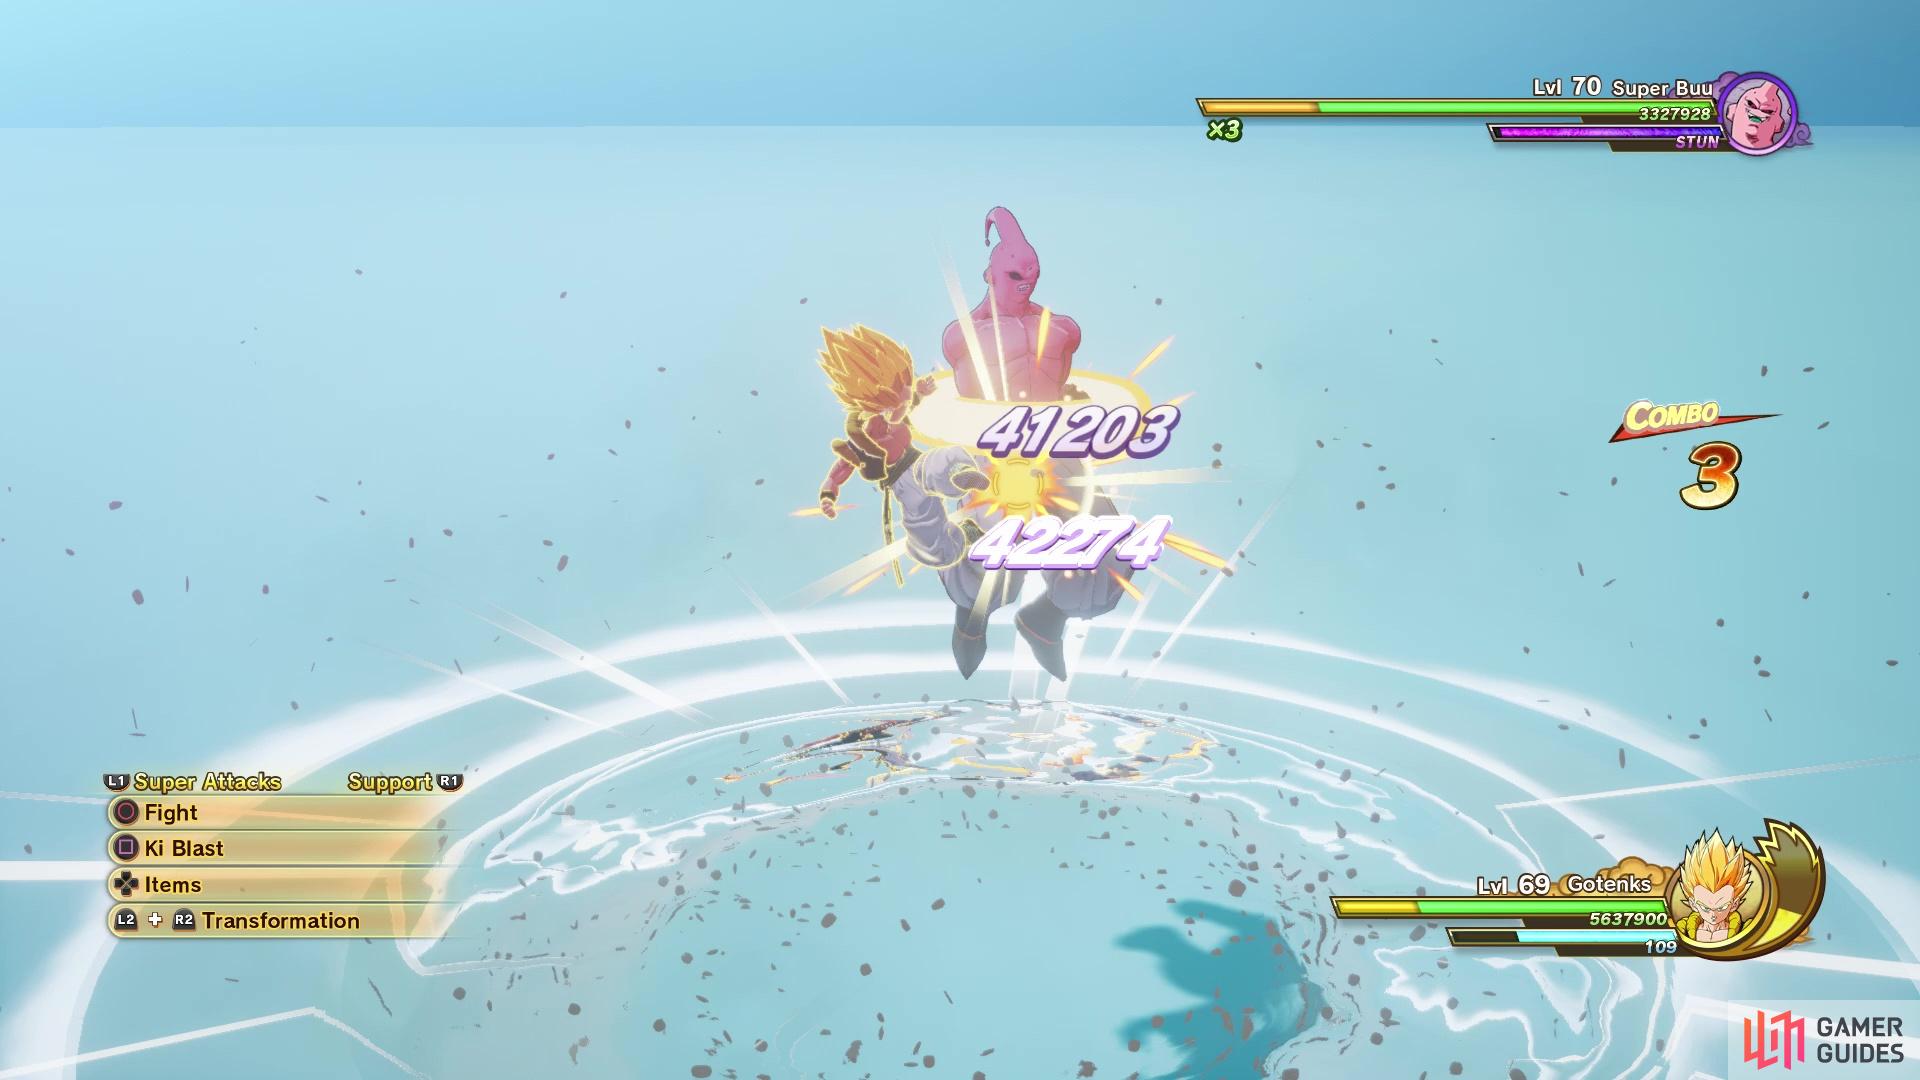 Galactic Donuts will bind Buu in place and even cancel attacks